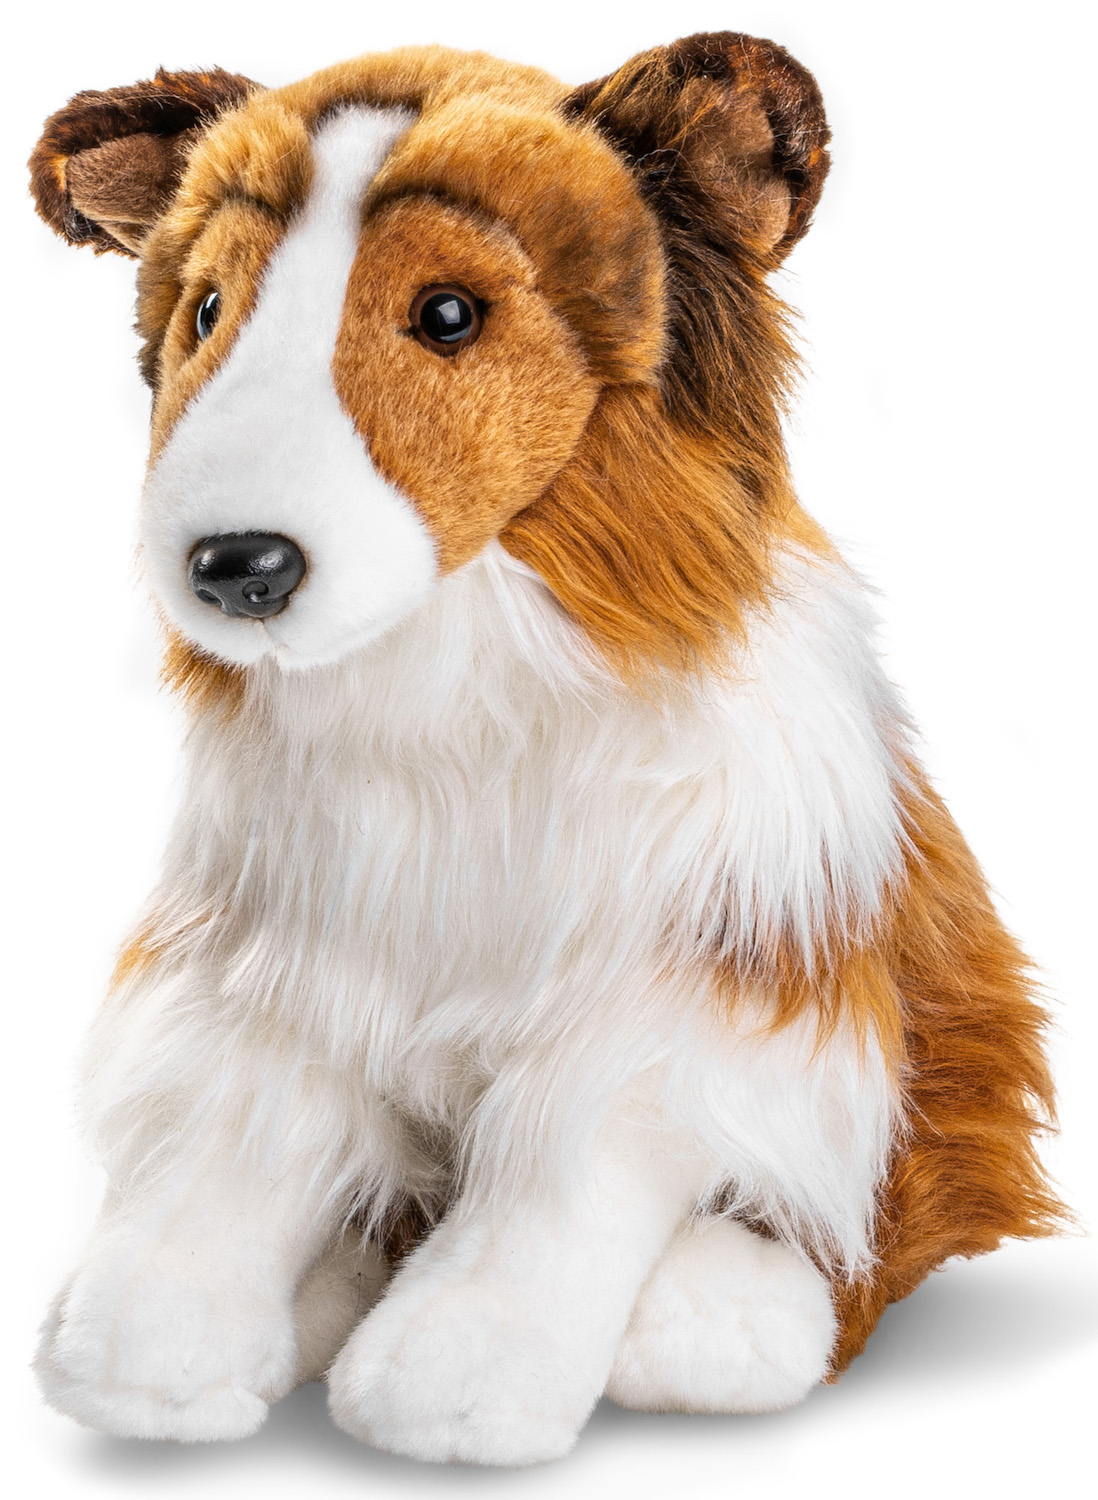 Rough Collie, Sitting - White-Brown Face - 27 cm (height) - Plush Dog, Collie, Pet - Stuffed Animal, Cuddly Toy